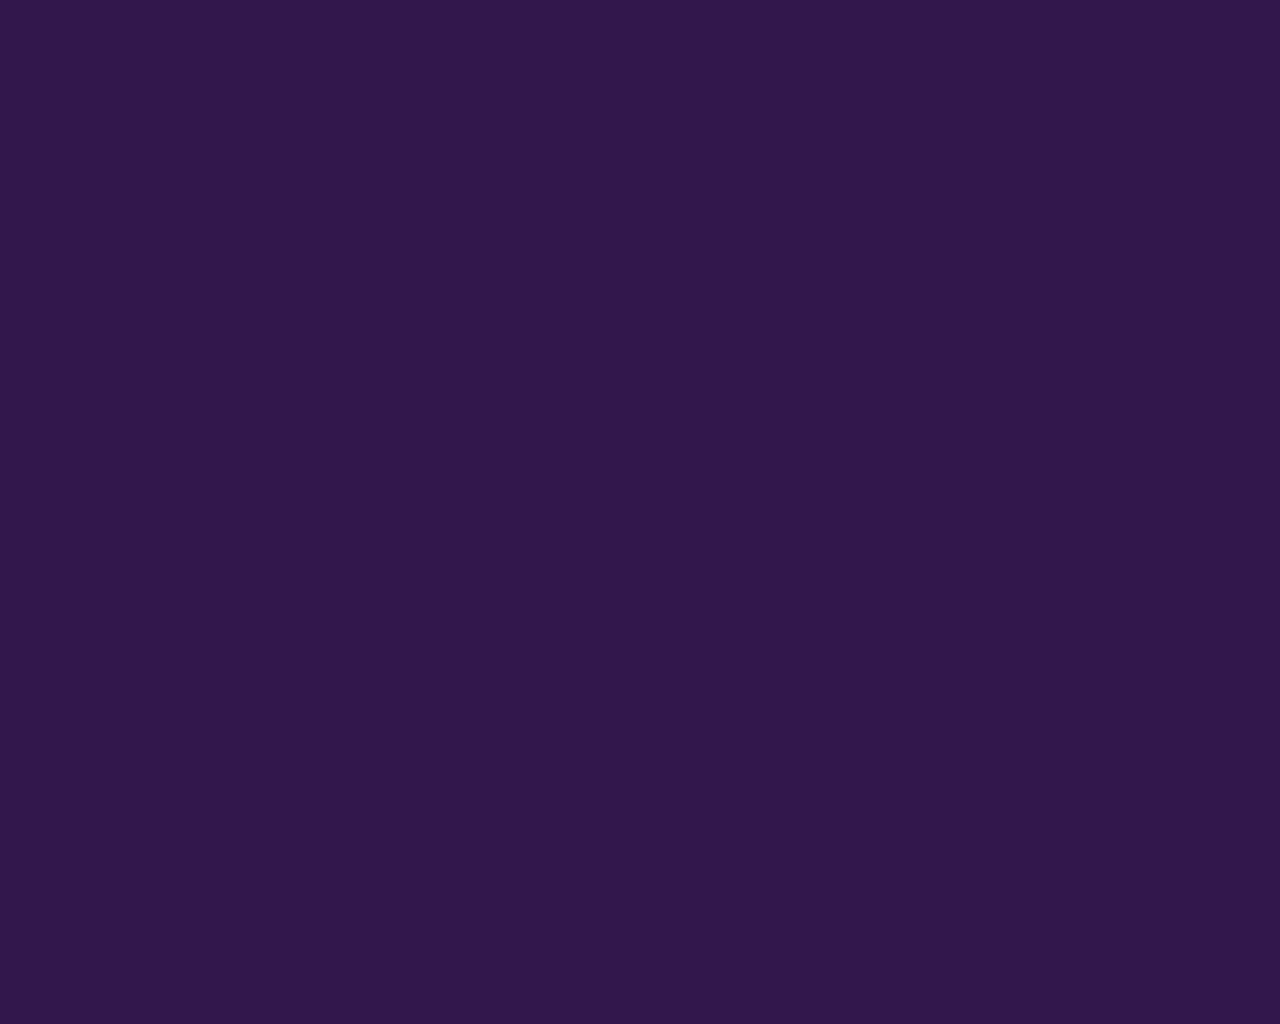 1280x1024 Russian Violet Solid Color Background